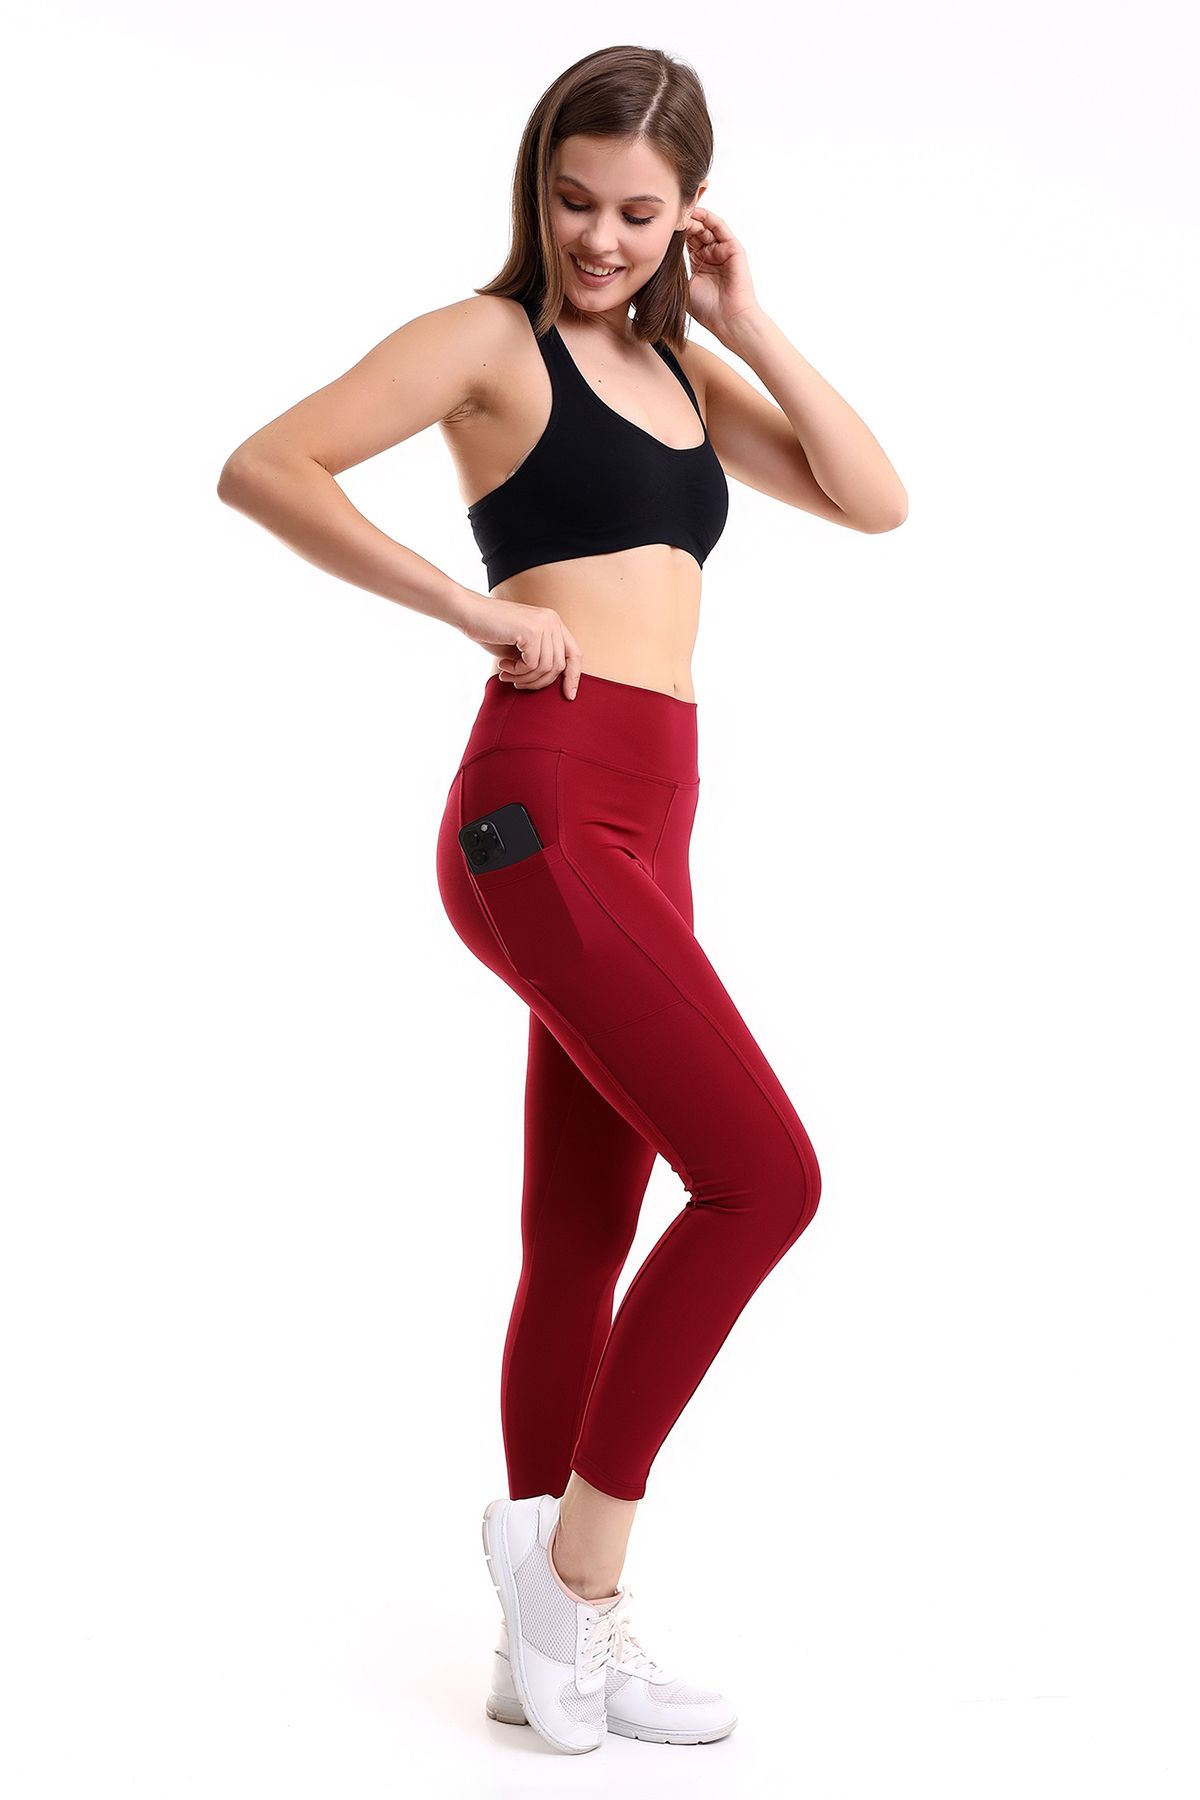 EMFURE Burgundy Women's Sports Tights Double Pocket Firming Tights